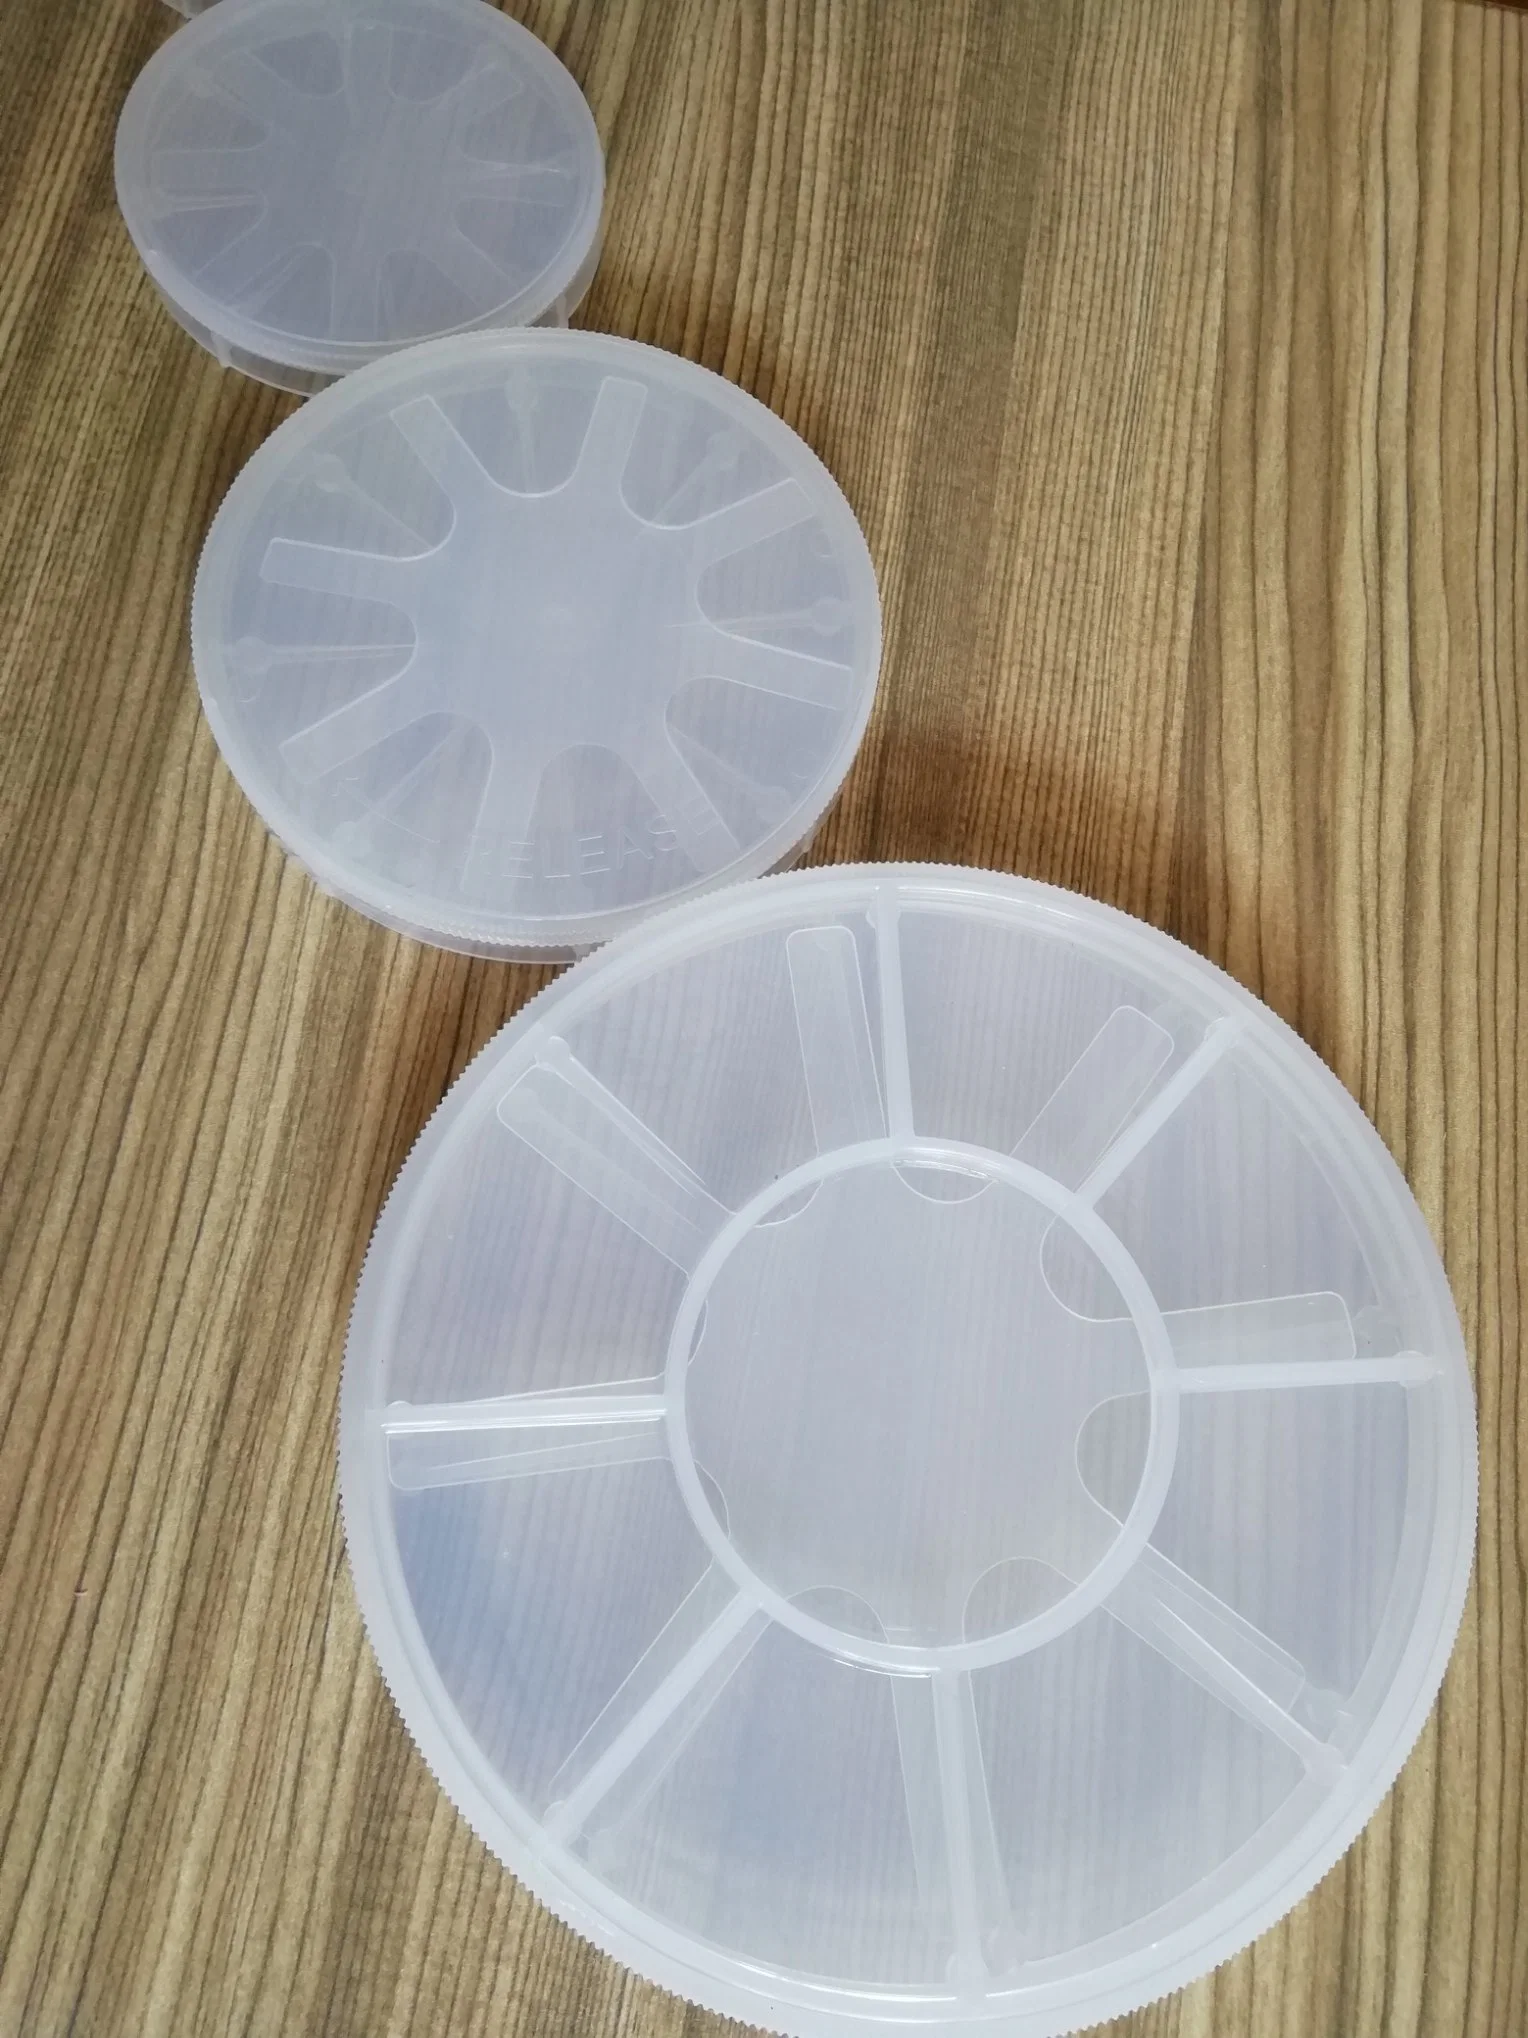 2 Inch Single Wafer Carrier Case Polypropylene Sp5-S2 10 Pieces / Pack